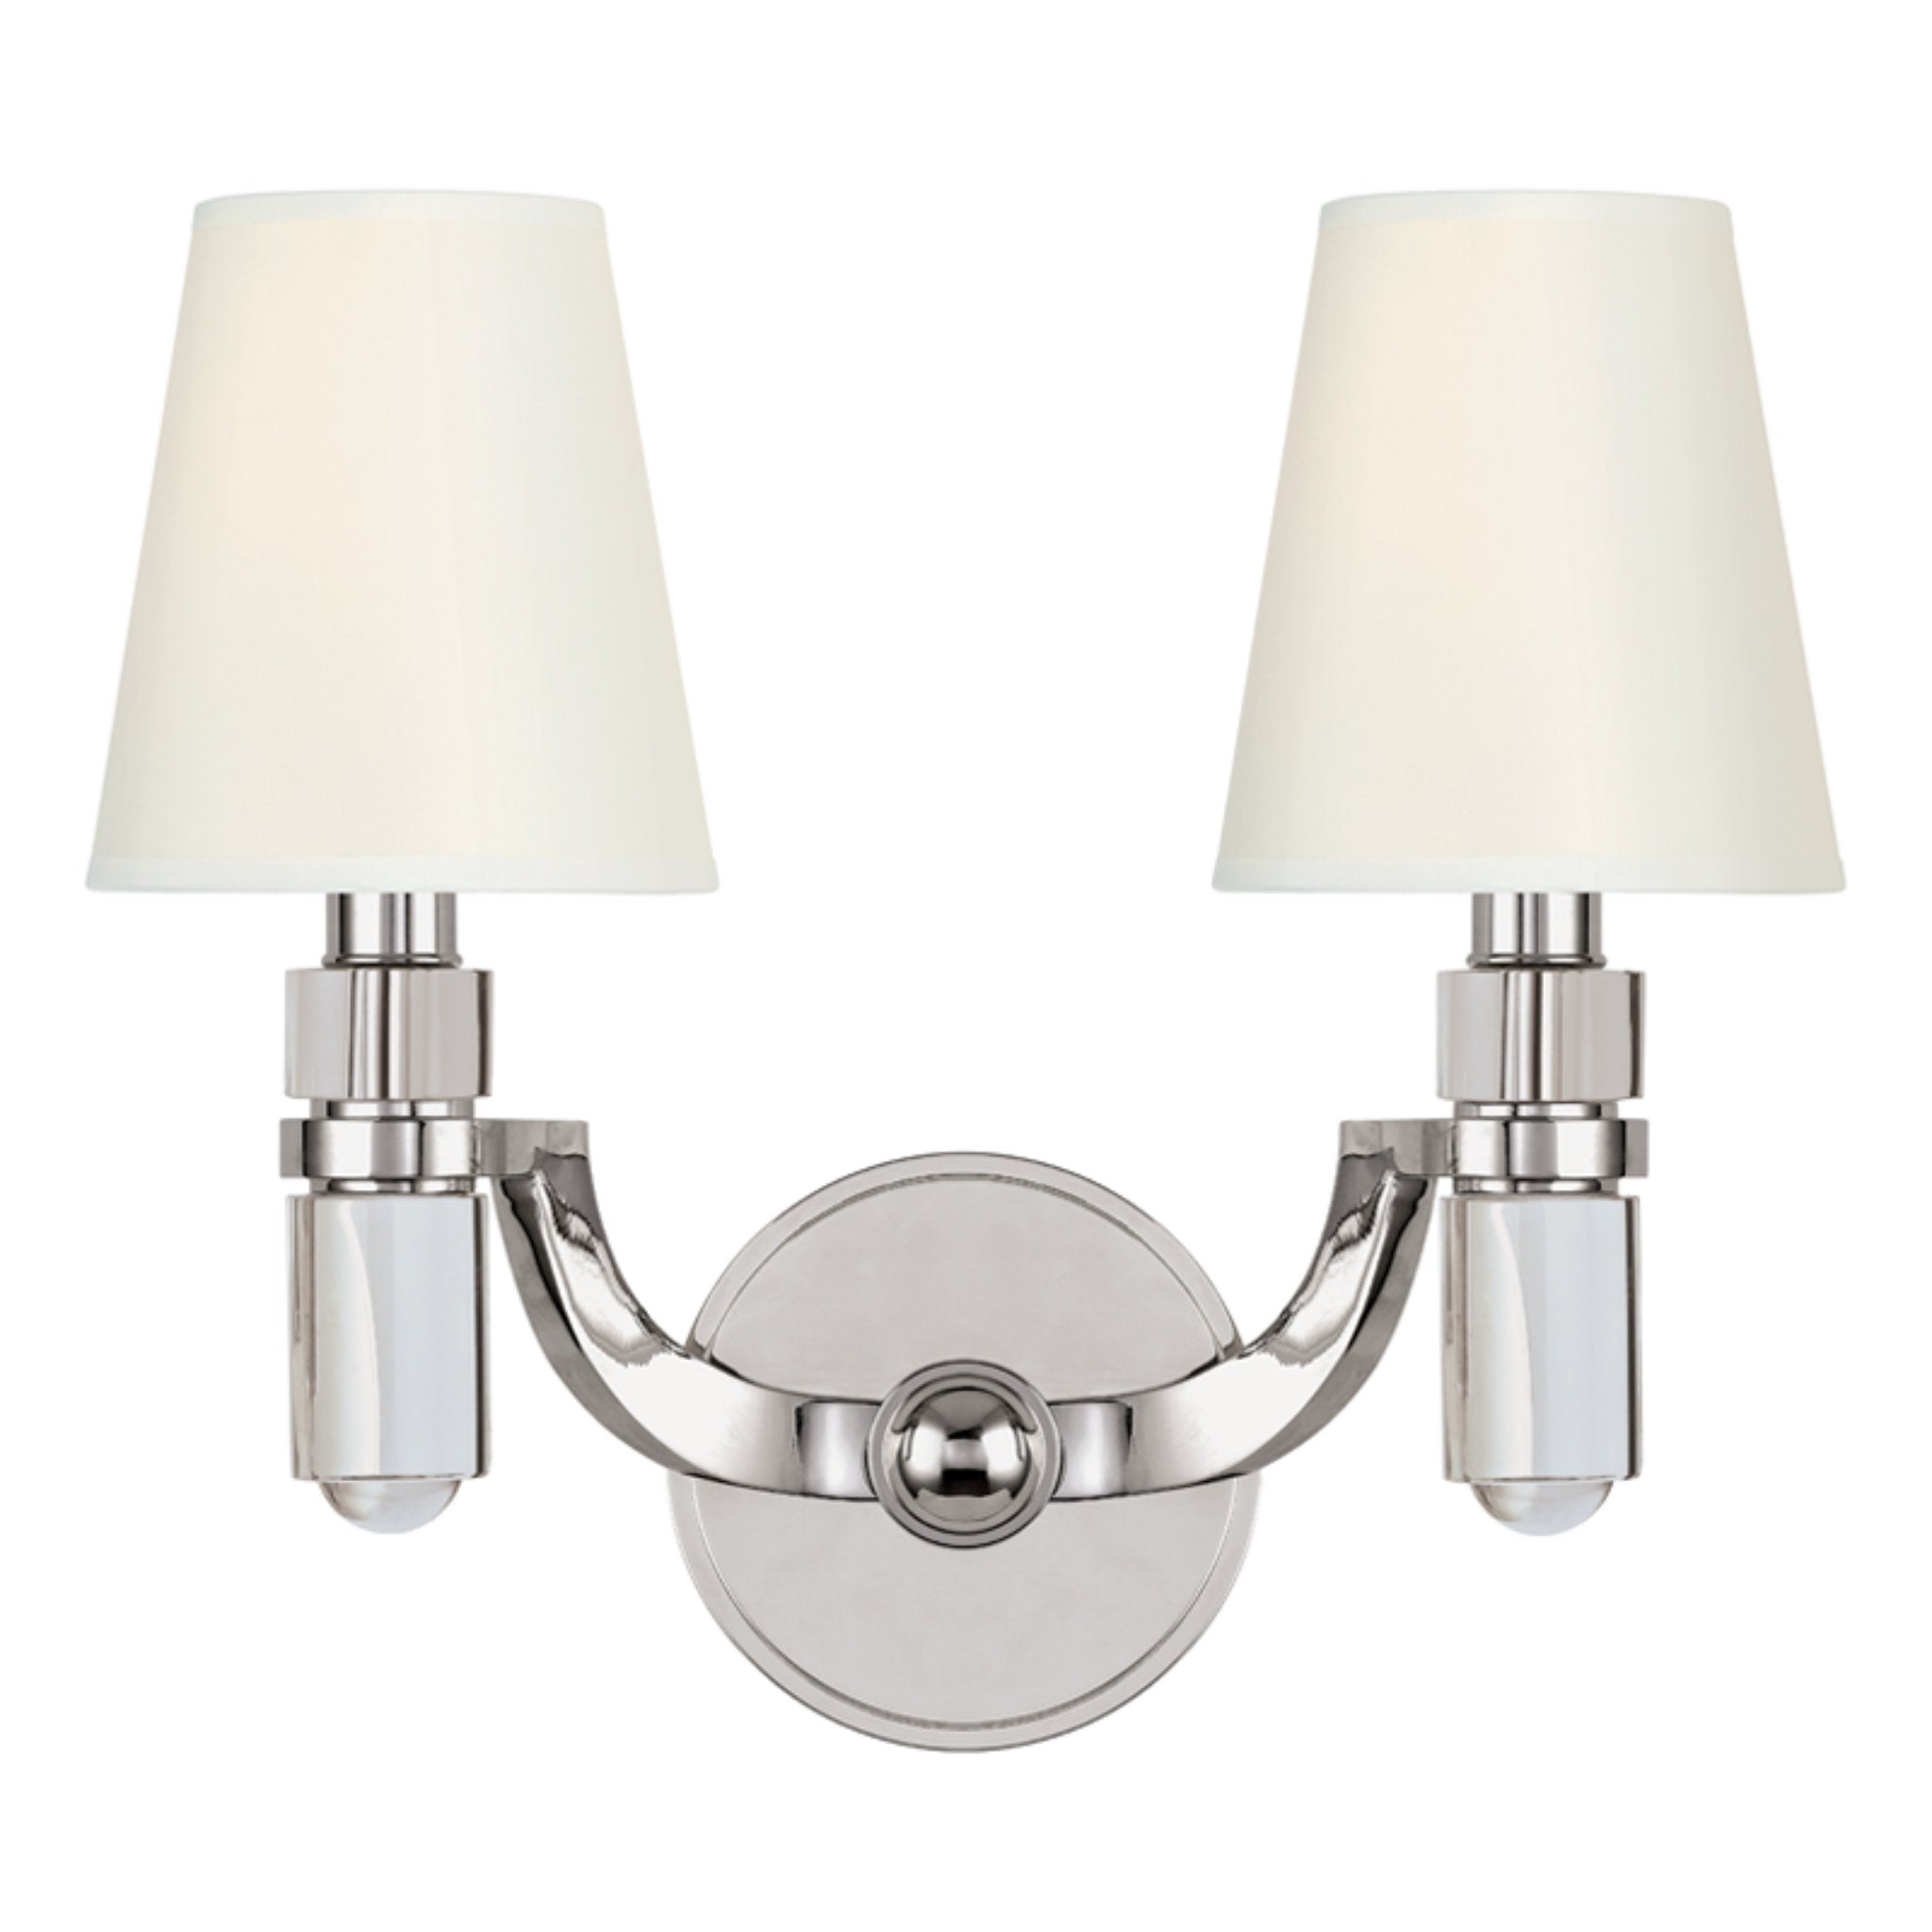 Dayton 2 Light Wall Sconce in Polished Nickel